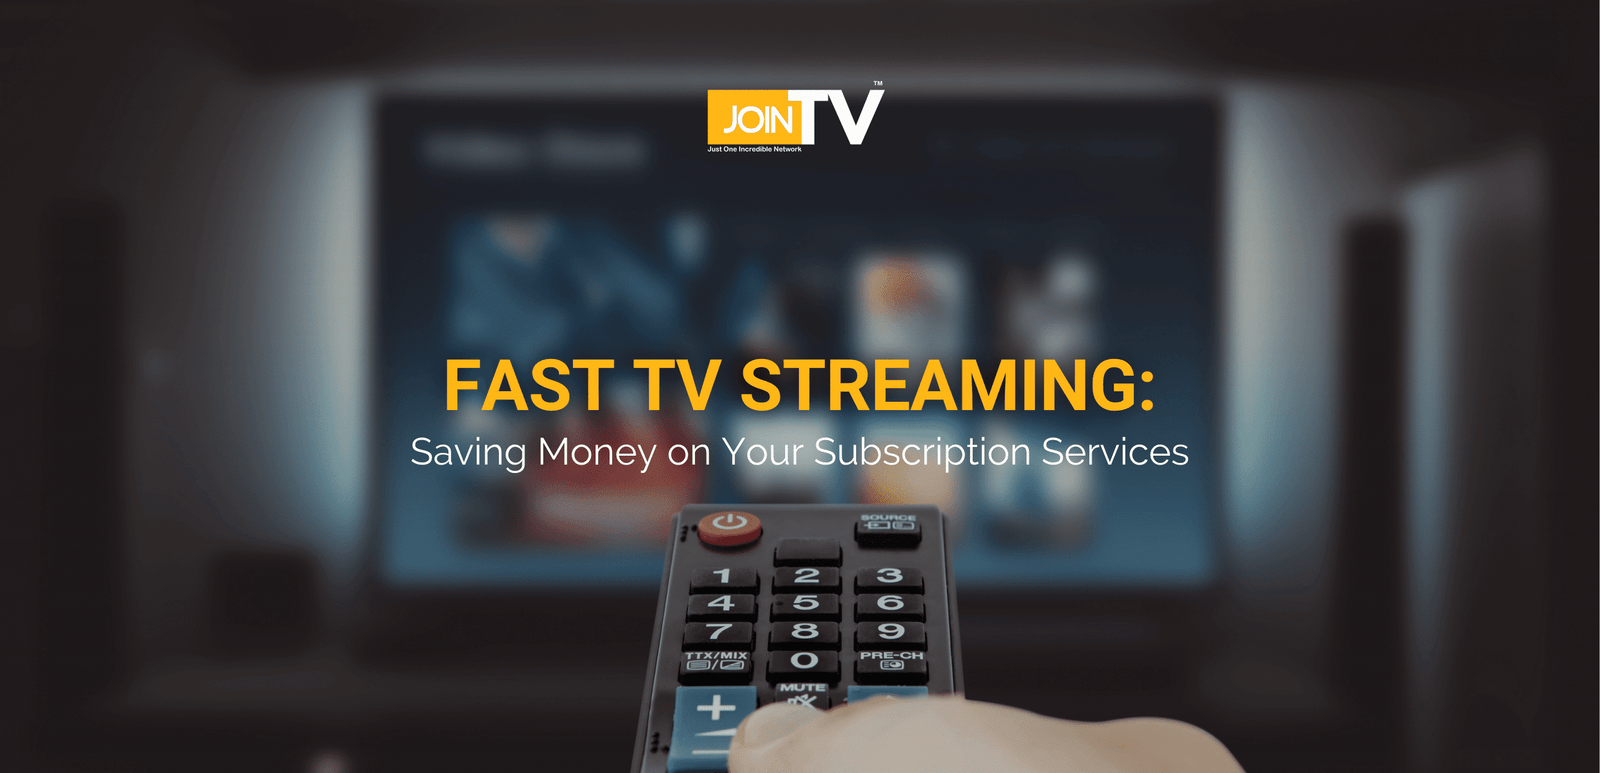 Fast TV Streaming: Saving Money on Your Subscription Services